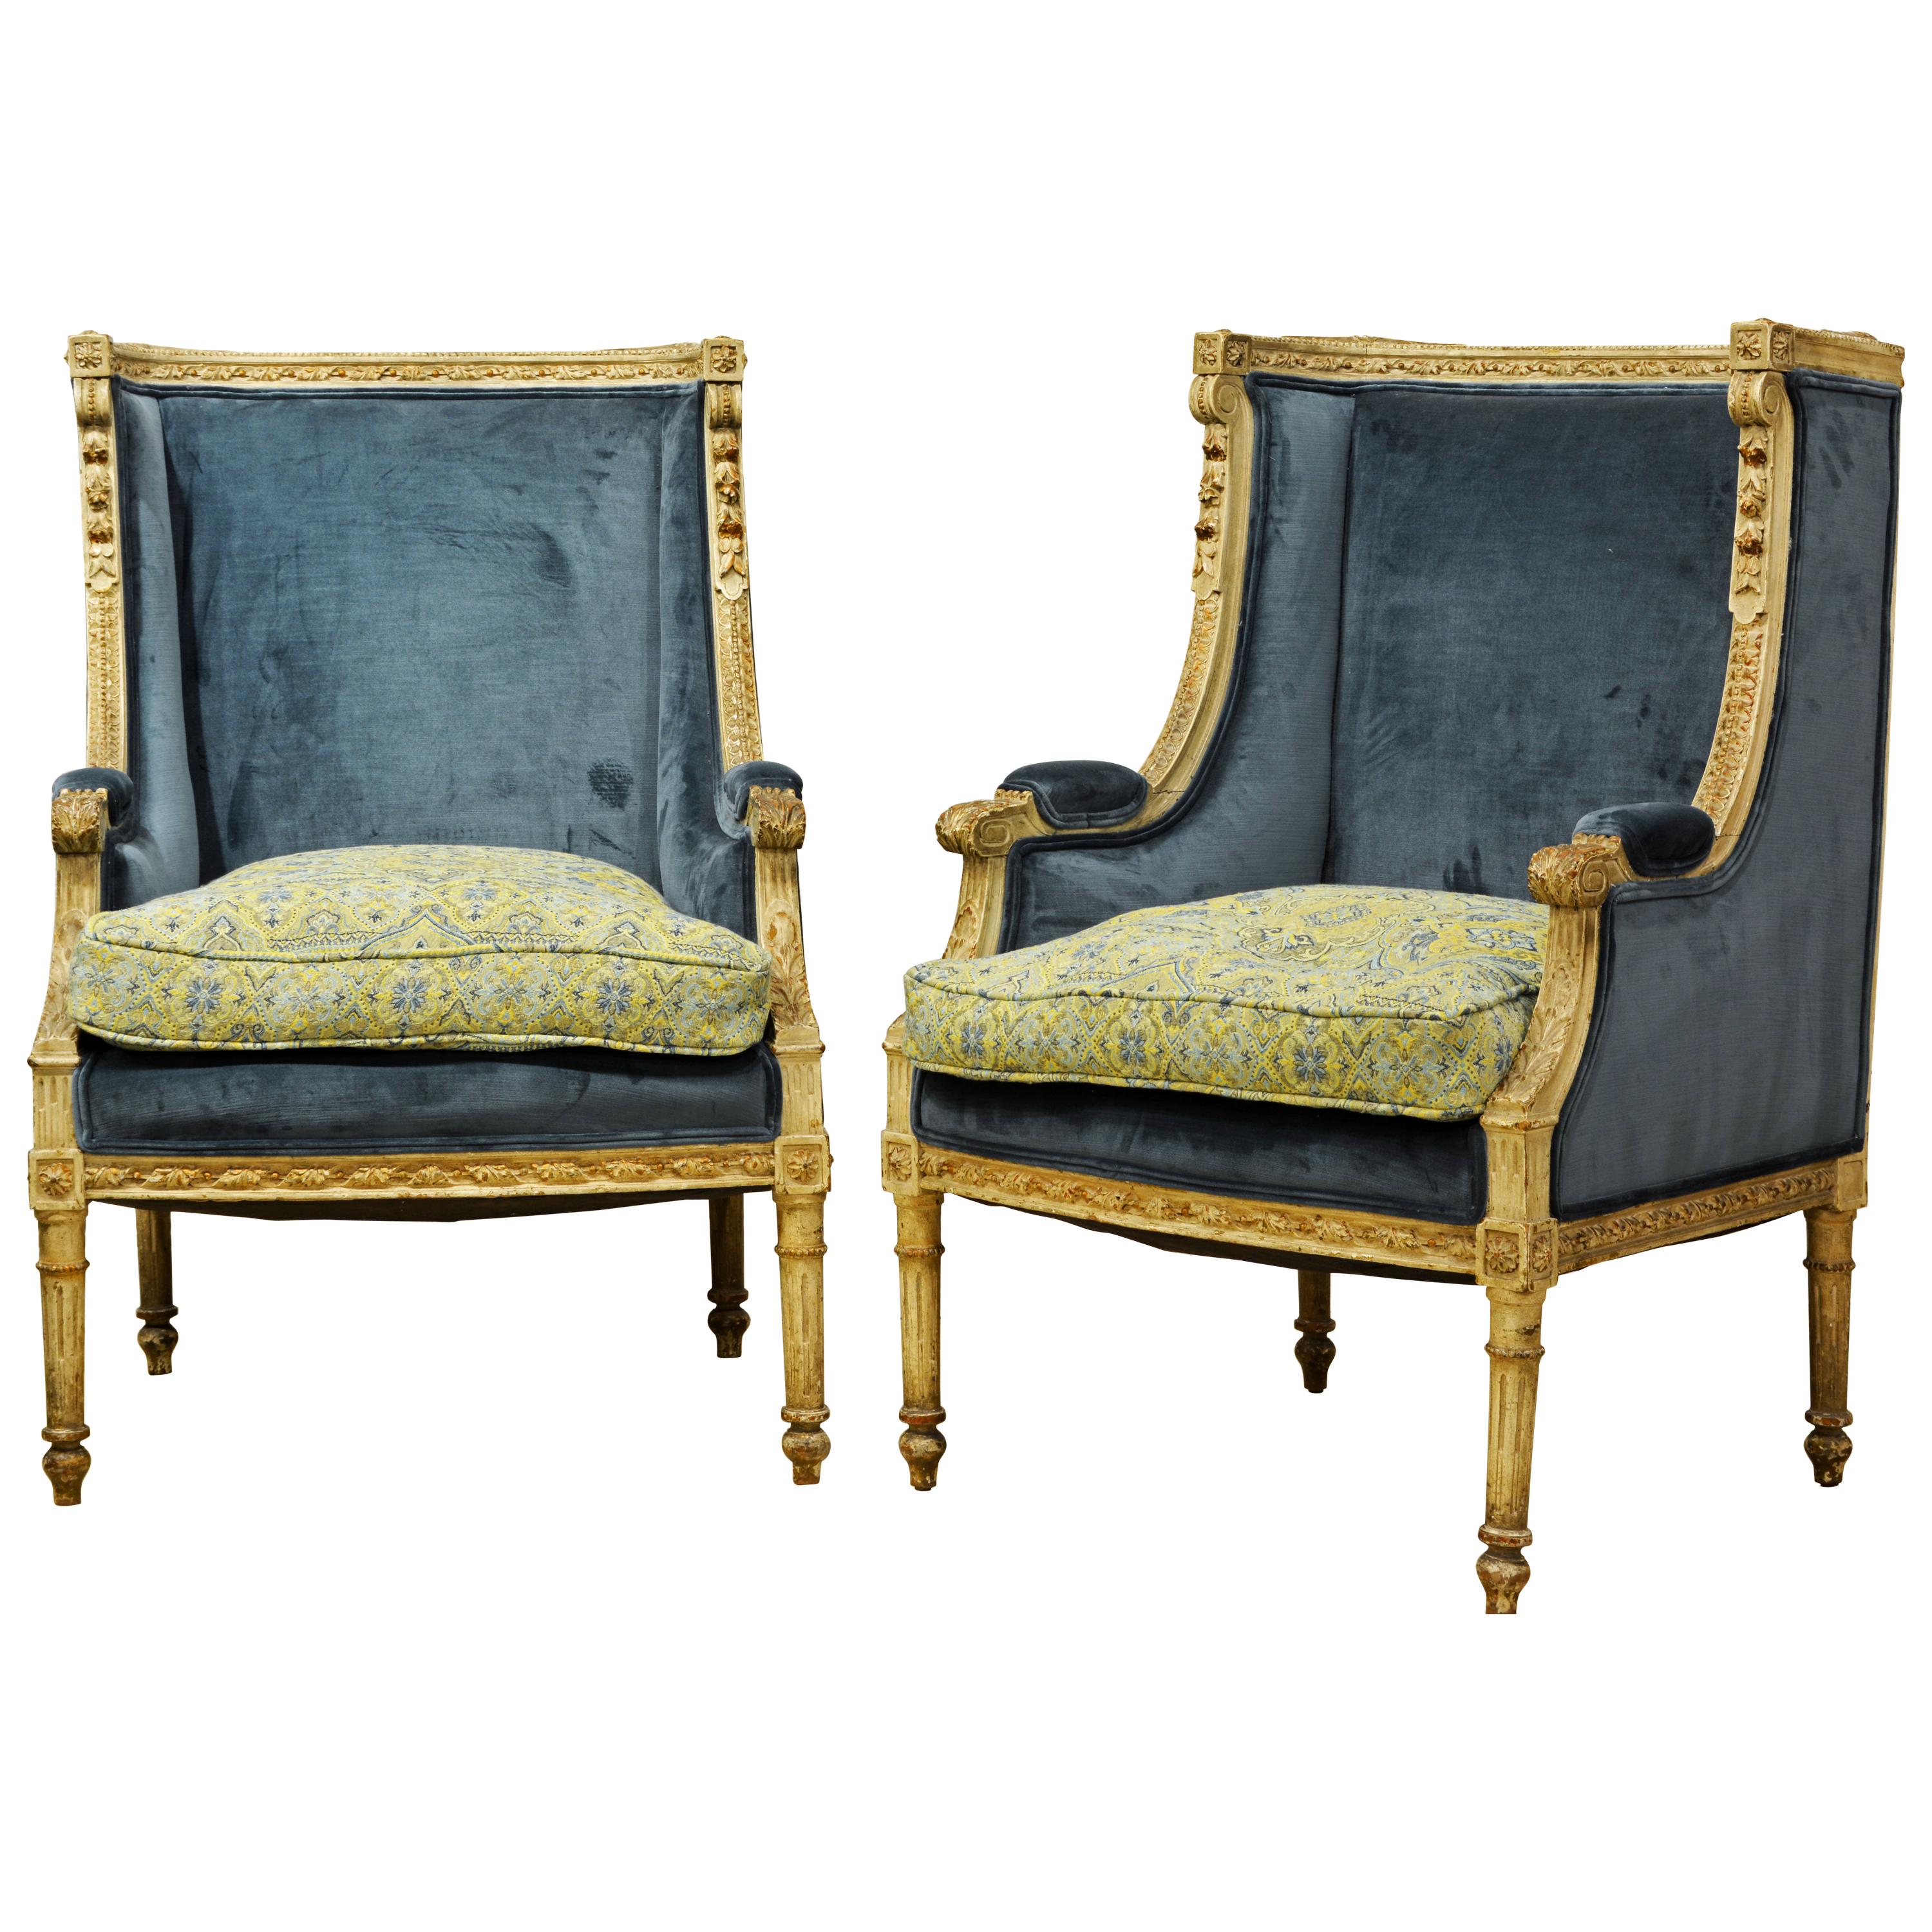 Pair of Late 19th Century, Louis XVI Style Carved and Painted Bergères